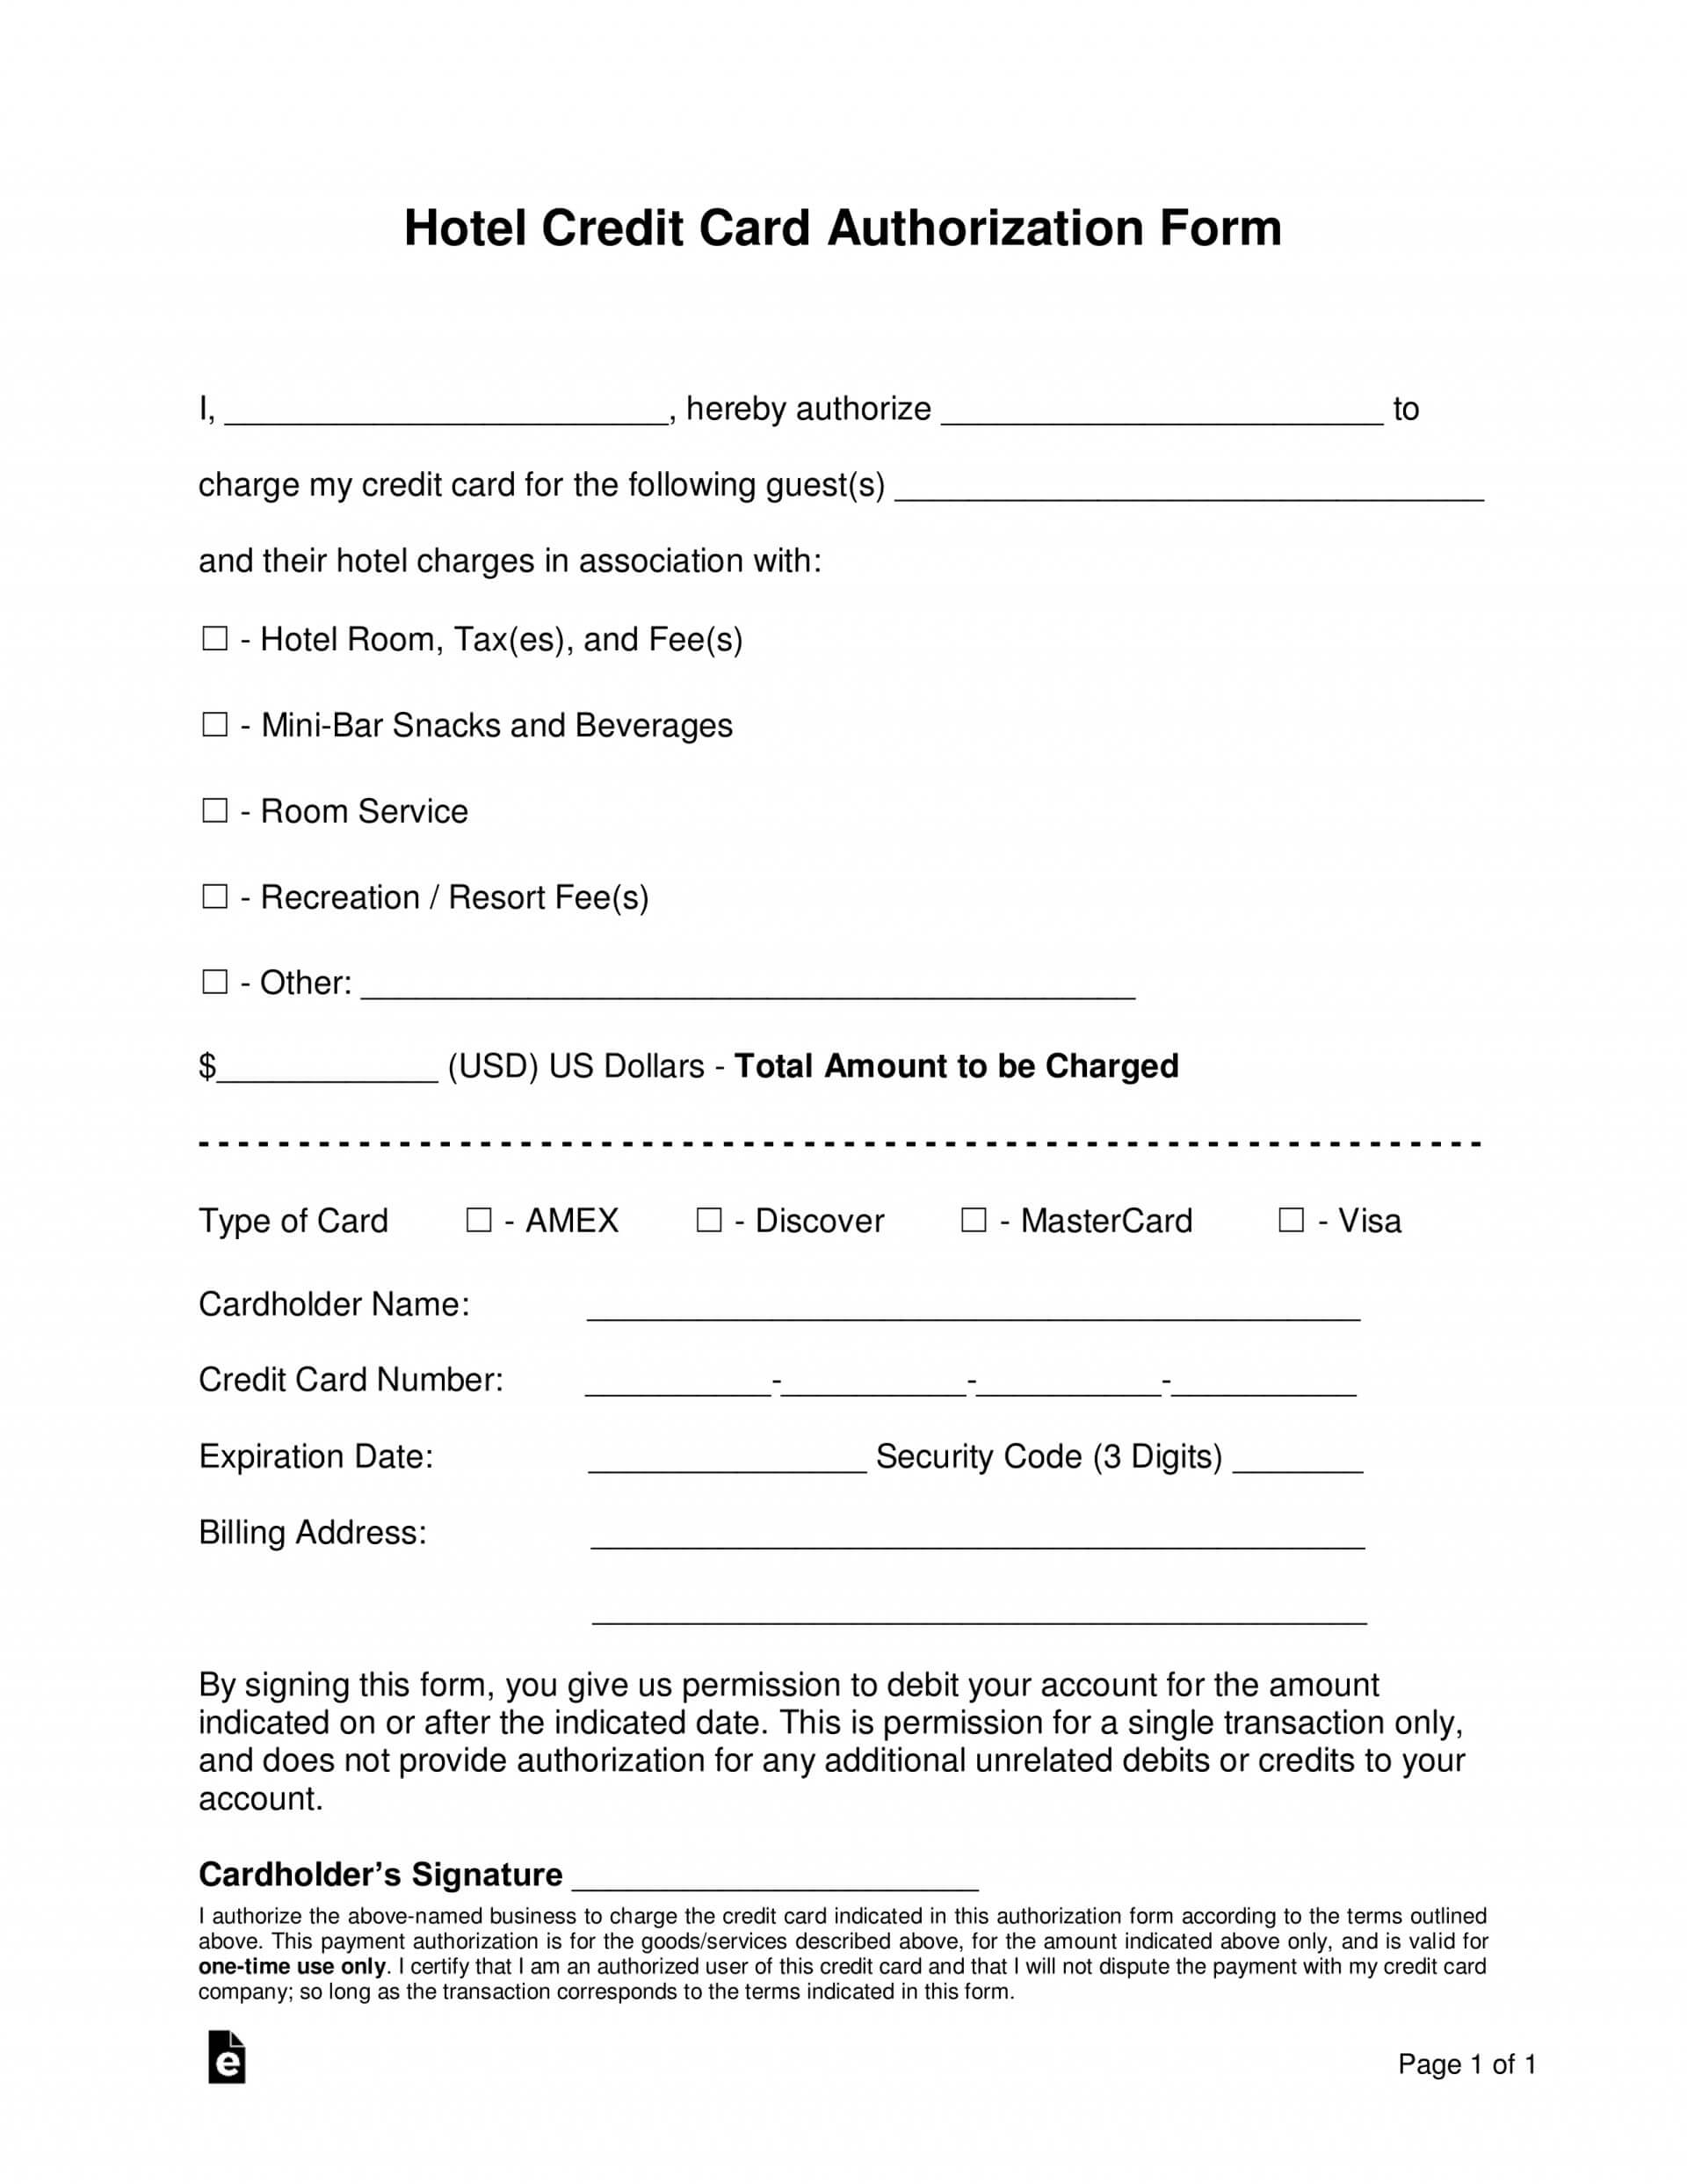 013 Credit Card Authorization Form Template Doc Hotel Within Hotel Credit Card Authorization Form Template